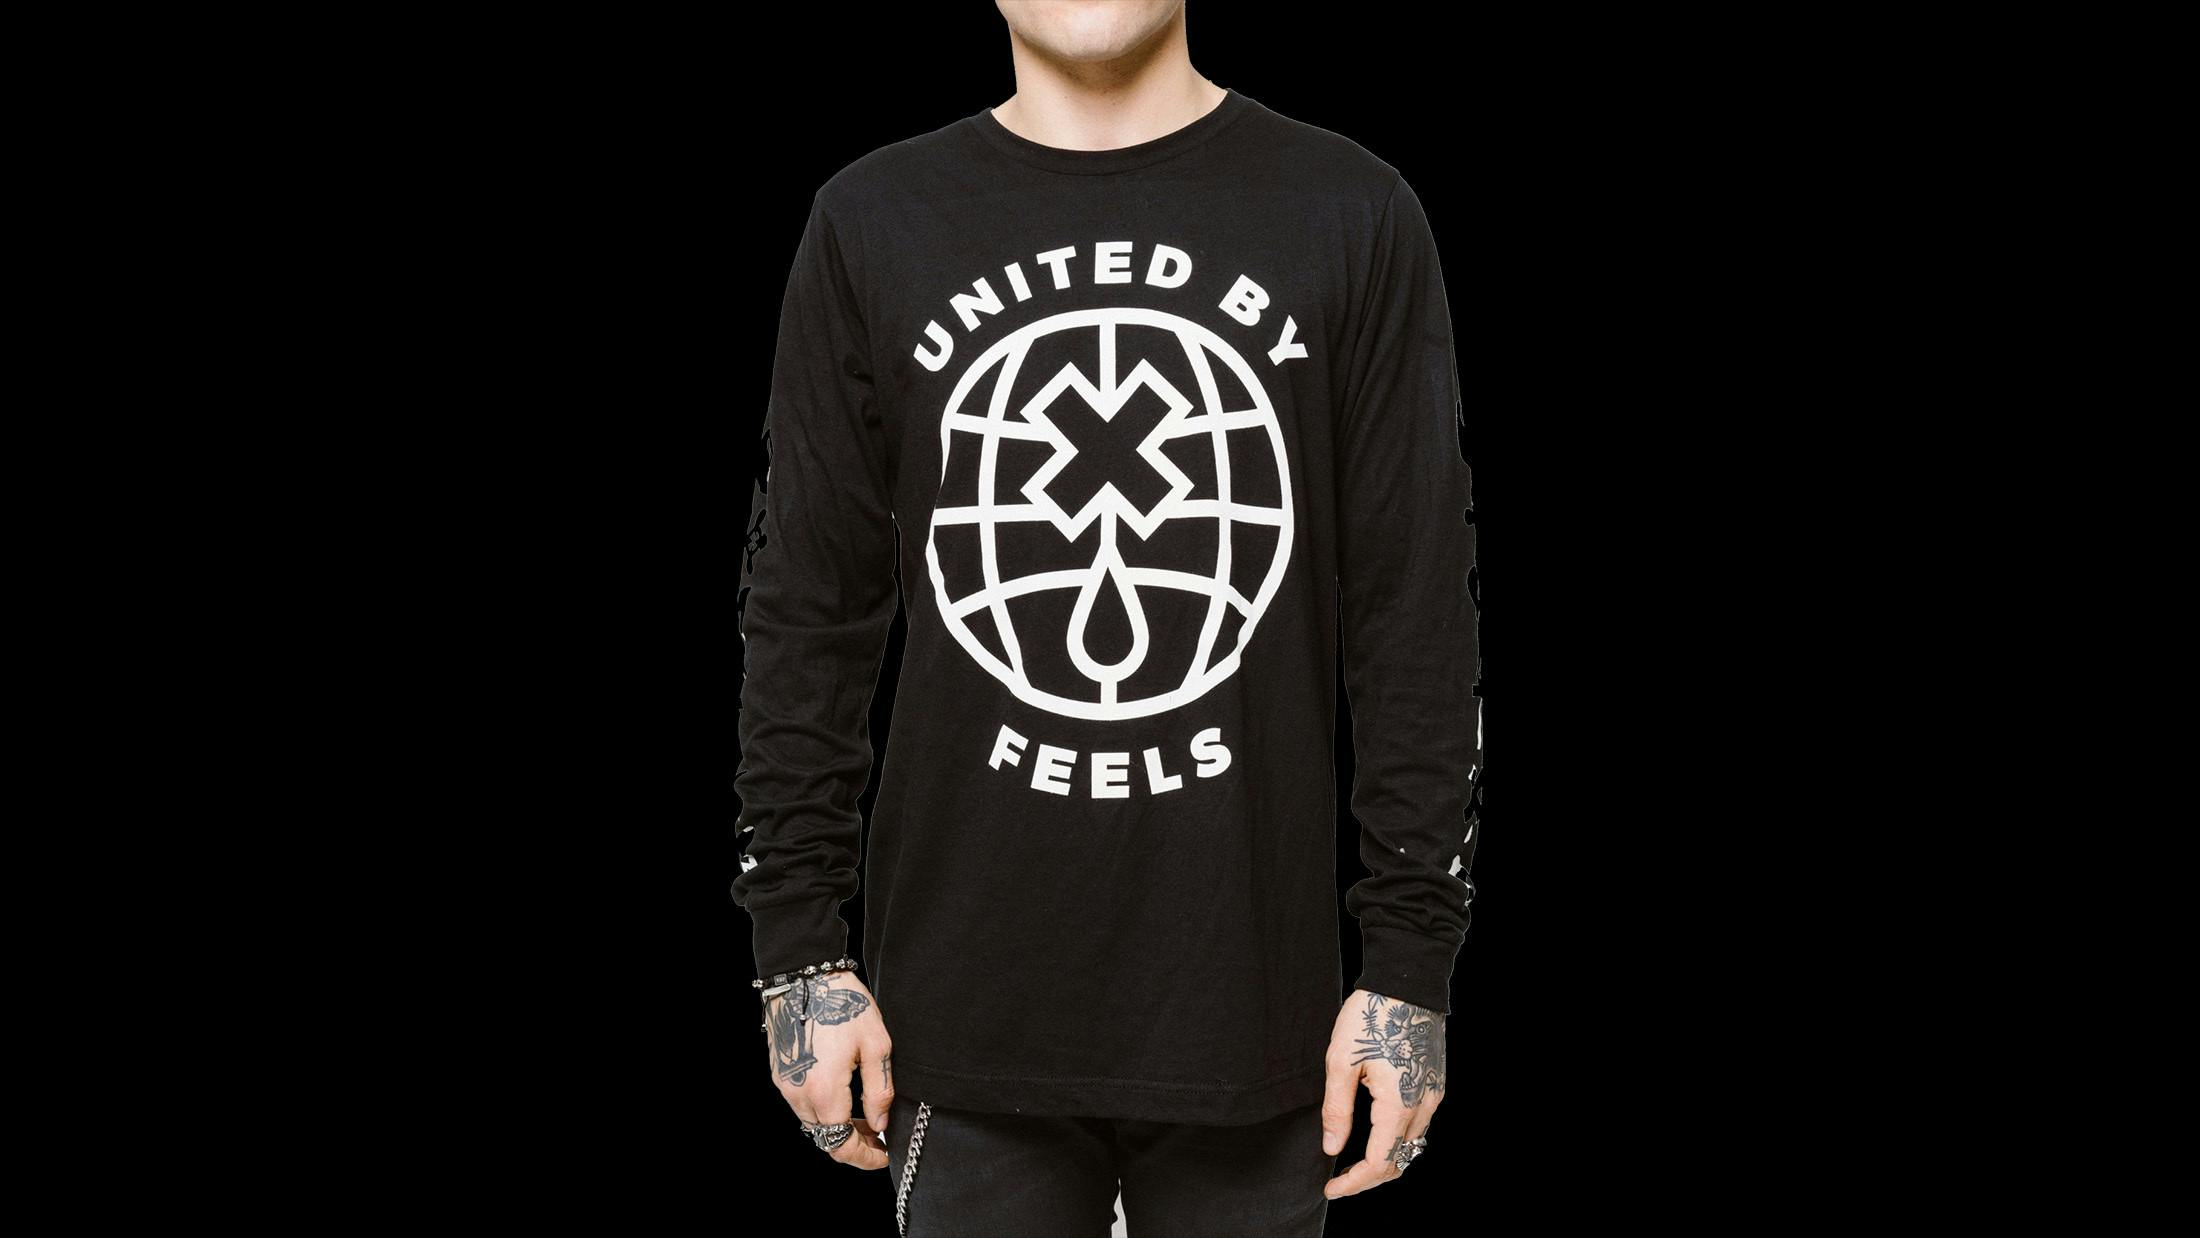 Let’s all share in the universal emotion of feeling sad af by adorning ourselves in this rad unisex longsleeve, courtesy of the gang over at Sad Boy Crew. We feel cheerier just looking at it, never mind what it must be like to wear.

$32.00 / £24.00

http://bit.ly/2BzMw6m